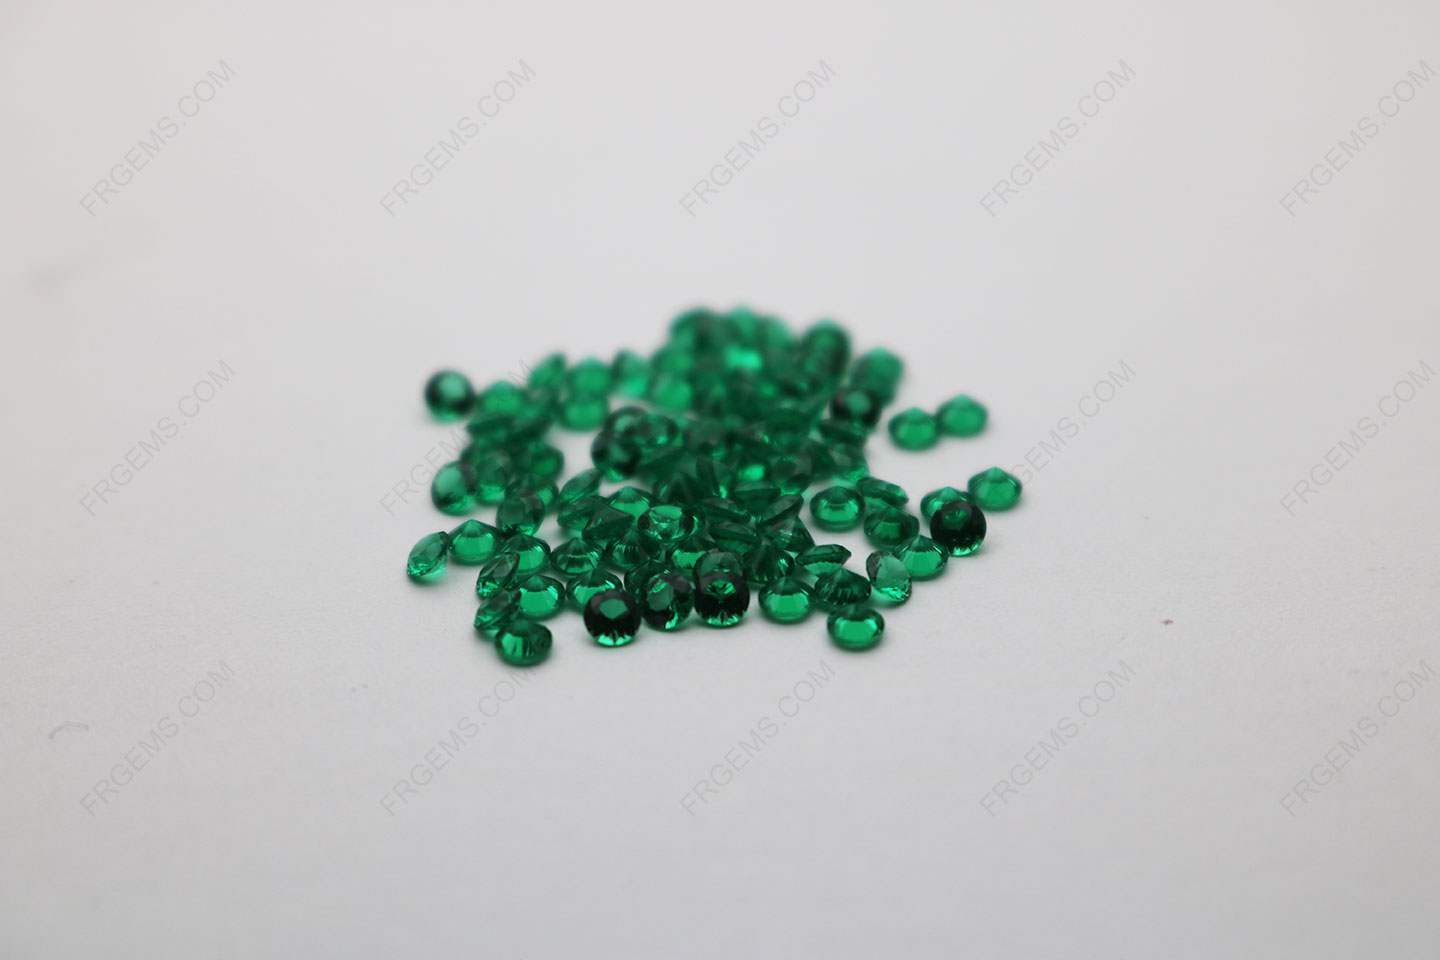 Nano-Crystal-VD-Emerald-111#-Round-shape-Faceted-Cut-2.50mm-gemstones-IMG_4984